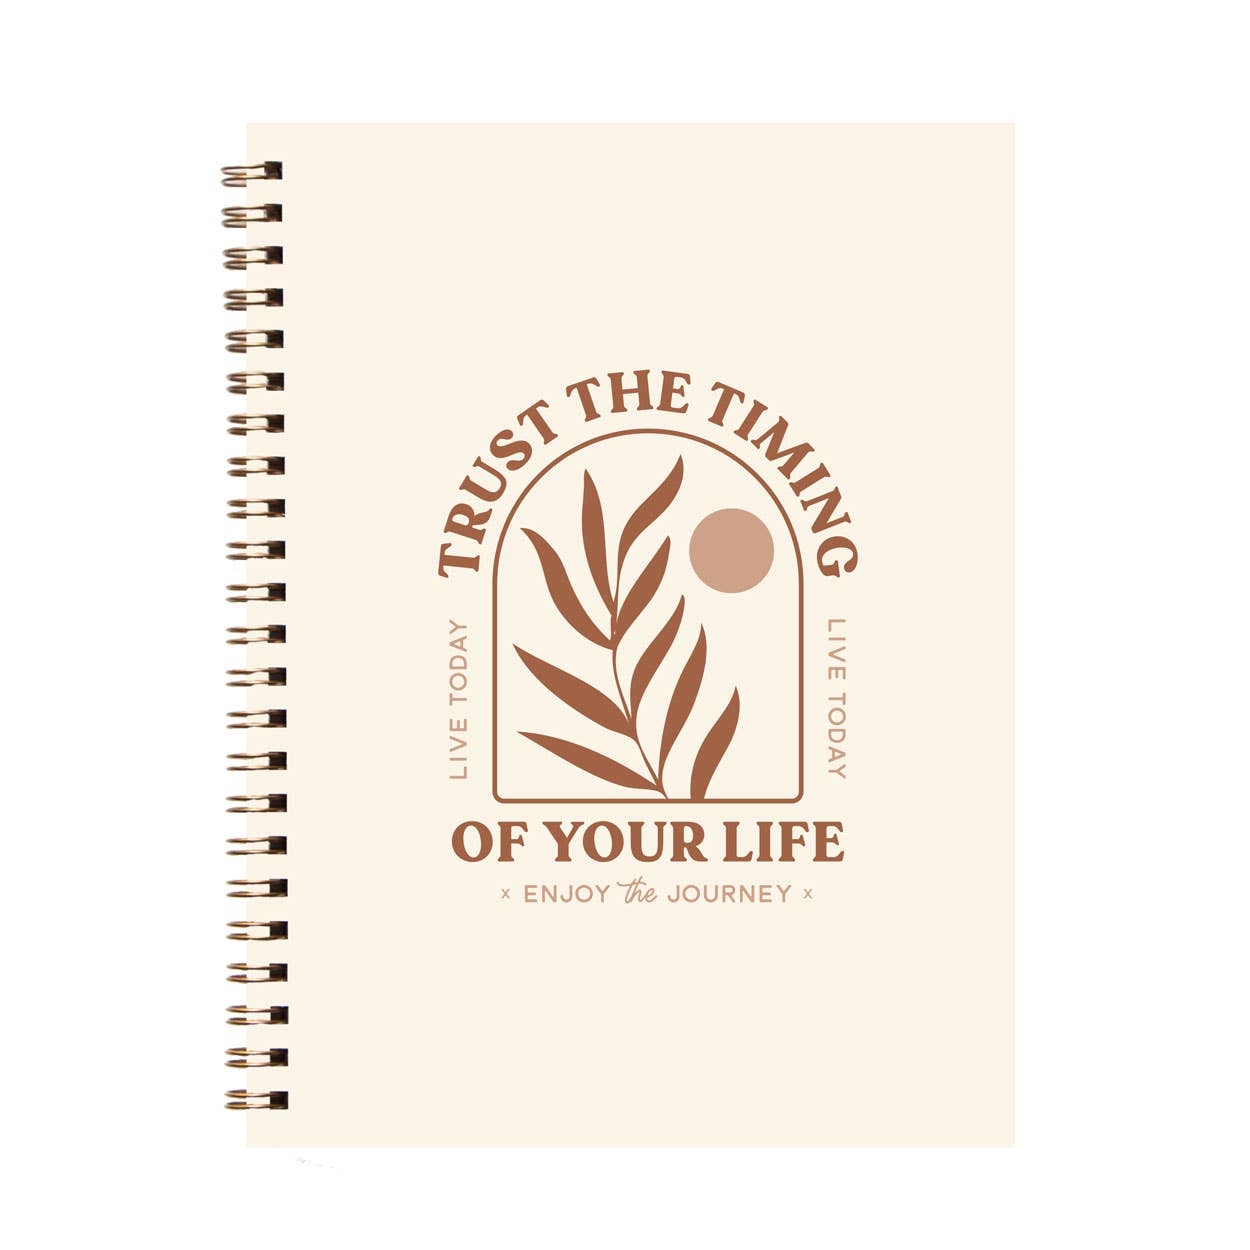 The Anastasia Co - Trust the Timing of Your Life Spiral Journal Notebook